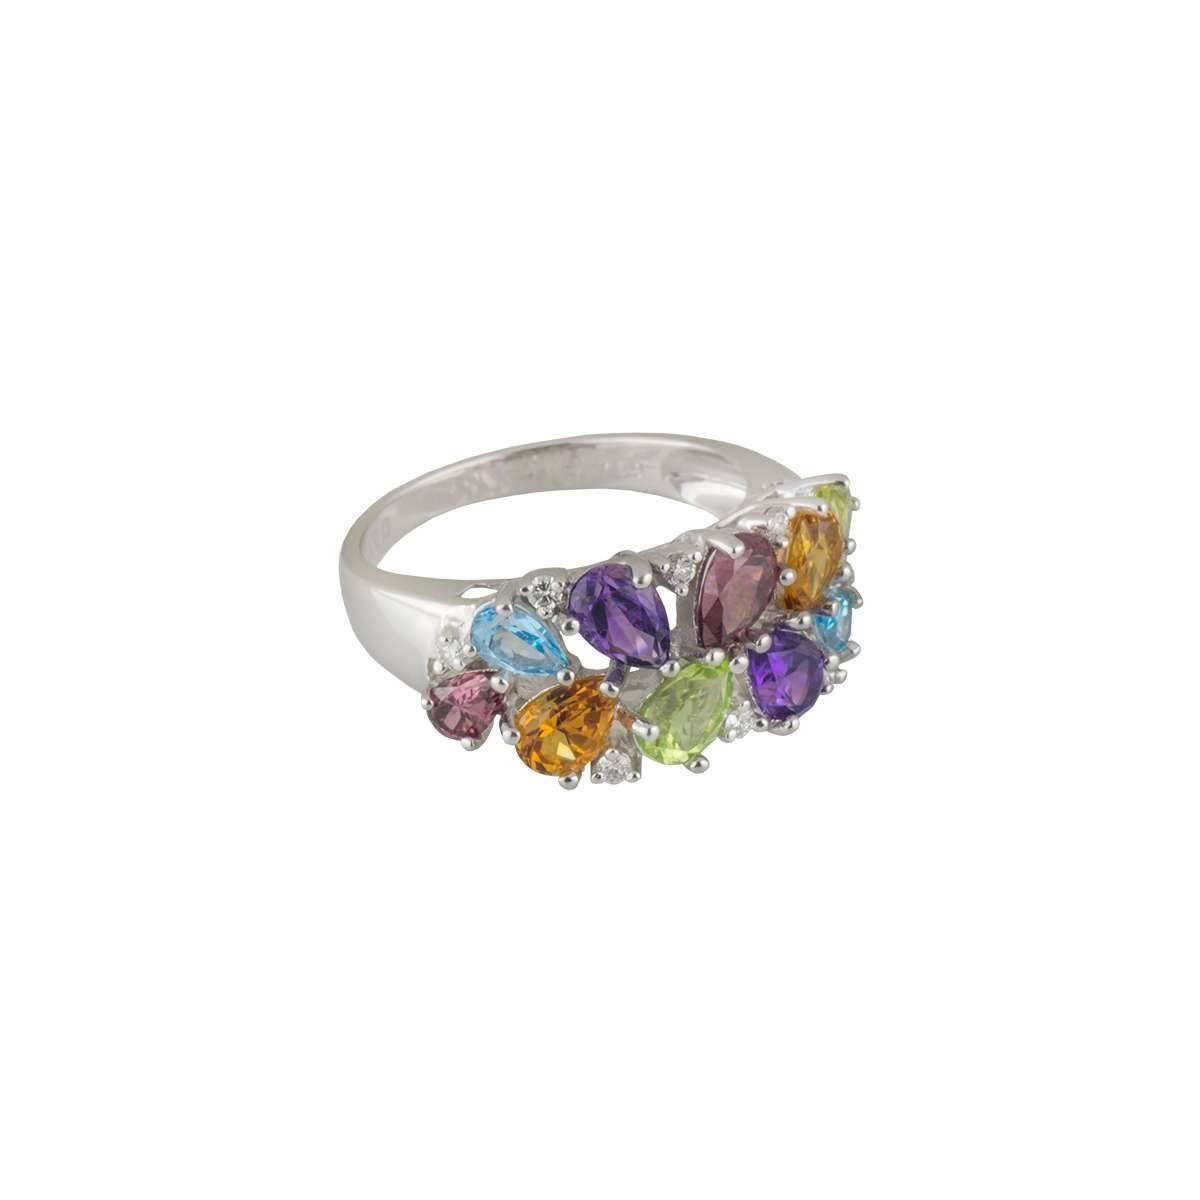 A unique 18k white gold diamond and multi-gemstone ring. The ring comprises of 8 round brilliant cut diamonds with a total weight of 0.13ct, H colour and VS-SI clarity. The ring also has various sizes of pear cut gemstones. The gemstones include;